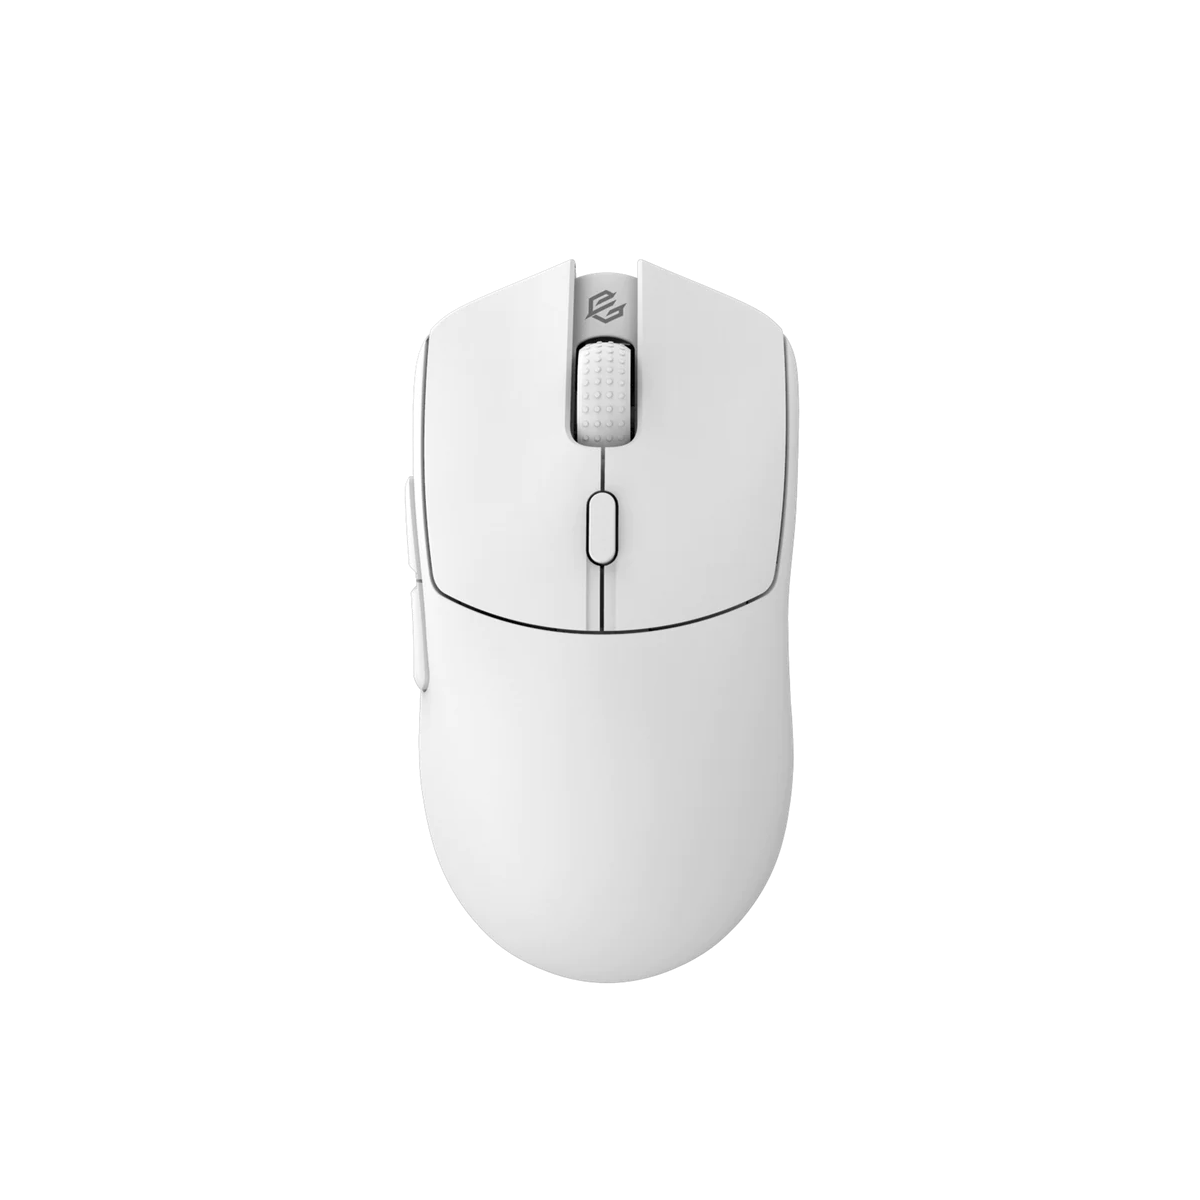 HT Wireless Gaming Mouse just for Reviewer and repair